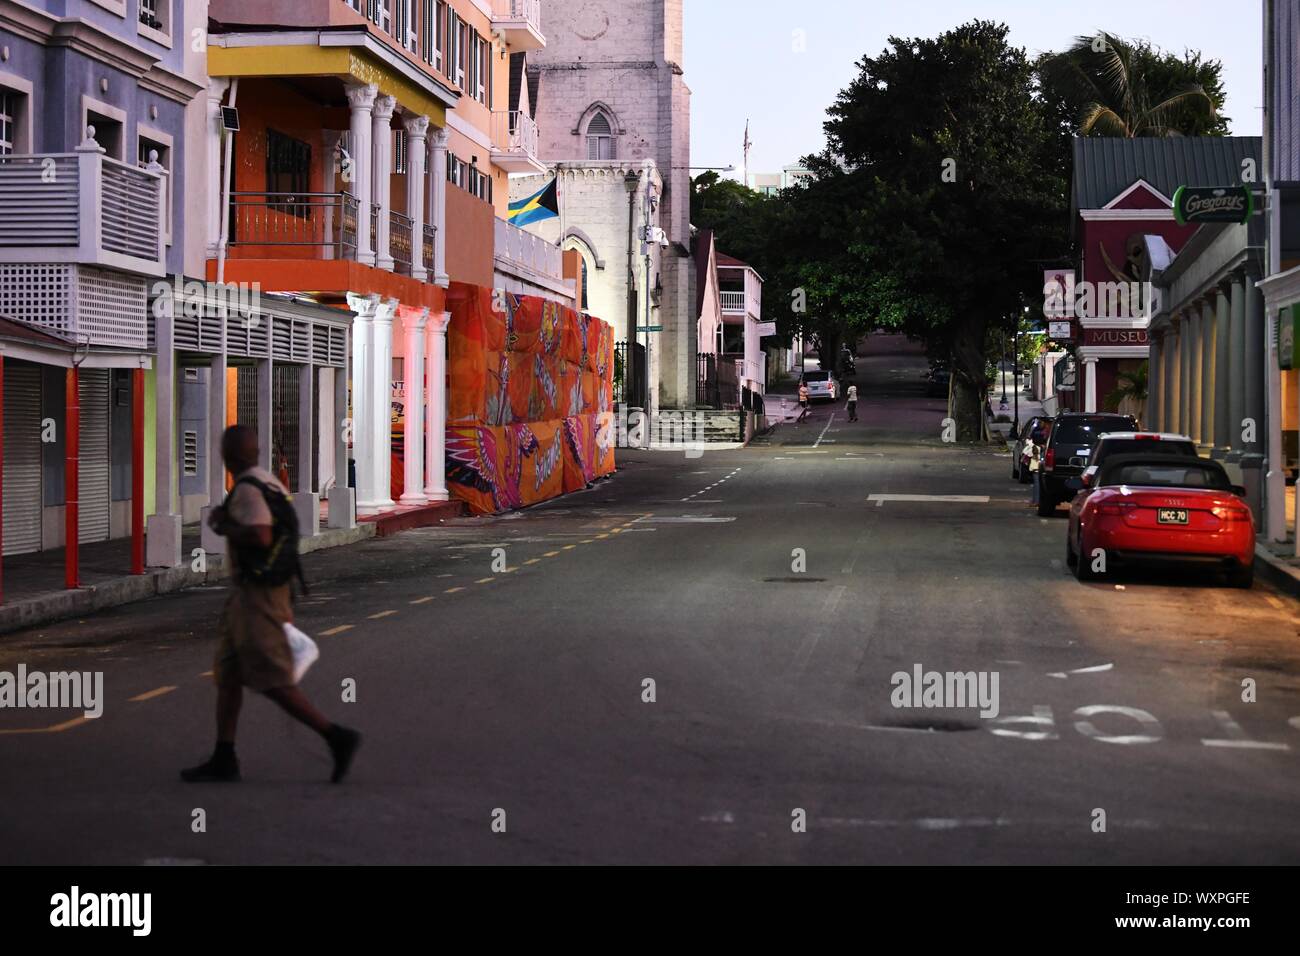 Nassau, Bahamas. 16th Sep, 2019. A man walks across the street days after Hurricane Dorian swept Nassau, capital of Bahamas, Sept. 16, 2019. Hurricane Dorian, a Category 5 storm, made a landfall on Elbow Cay in Abaco Islands in the Bahamas on Sept. 1. According to media reports, the list of missing as a result of Hurricane Dorian stands at an alarming 1,300 people and the death toll at 50. Credit: Xin Yuewei/Xinhua/Alamy Live News Stock Photo